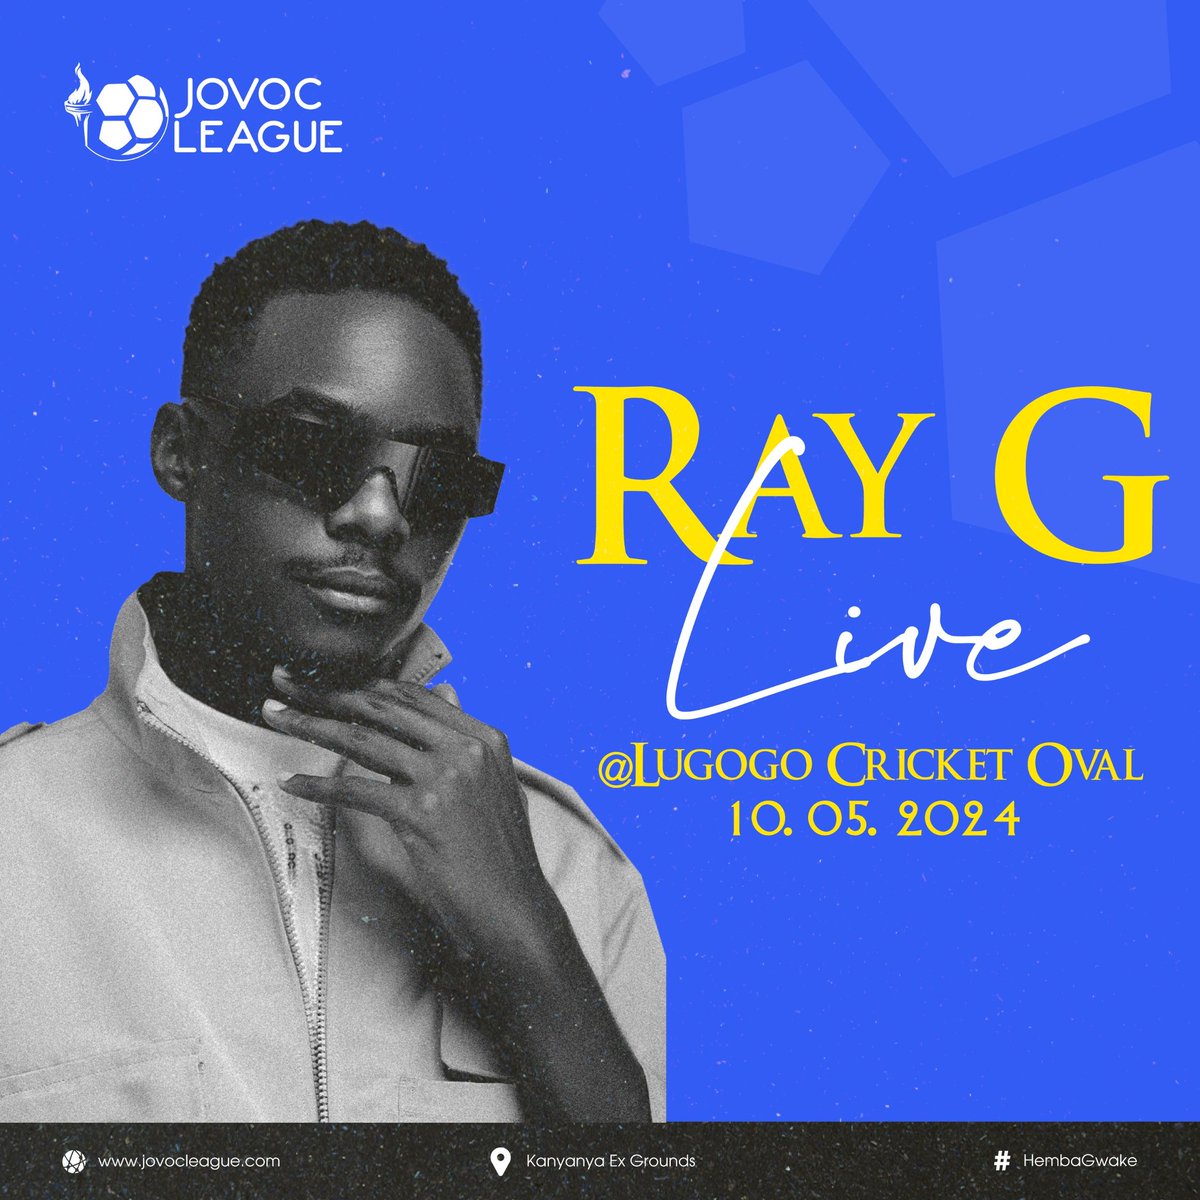 Let's light up Lugogo Cricket Oval on 10th May! Join @TheJovocLeague in backing the phenomenal @Ray_G_official! @912CroozeFM @GalaxyFMUg @Kagwirawo @NobatEvents #RayGLiveInConcert #HembaGwake 🔥